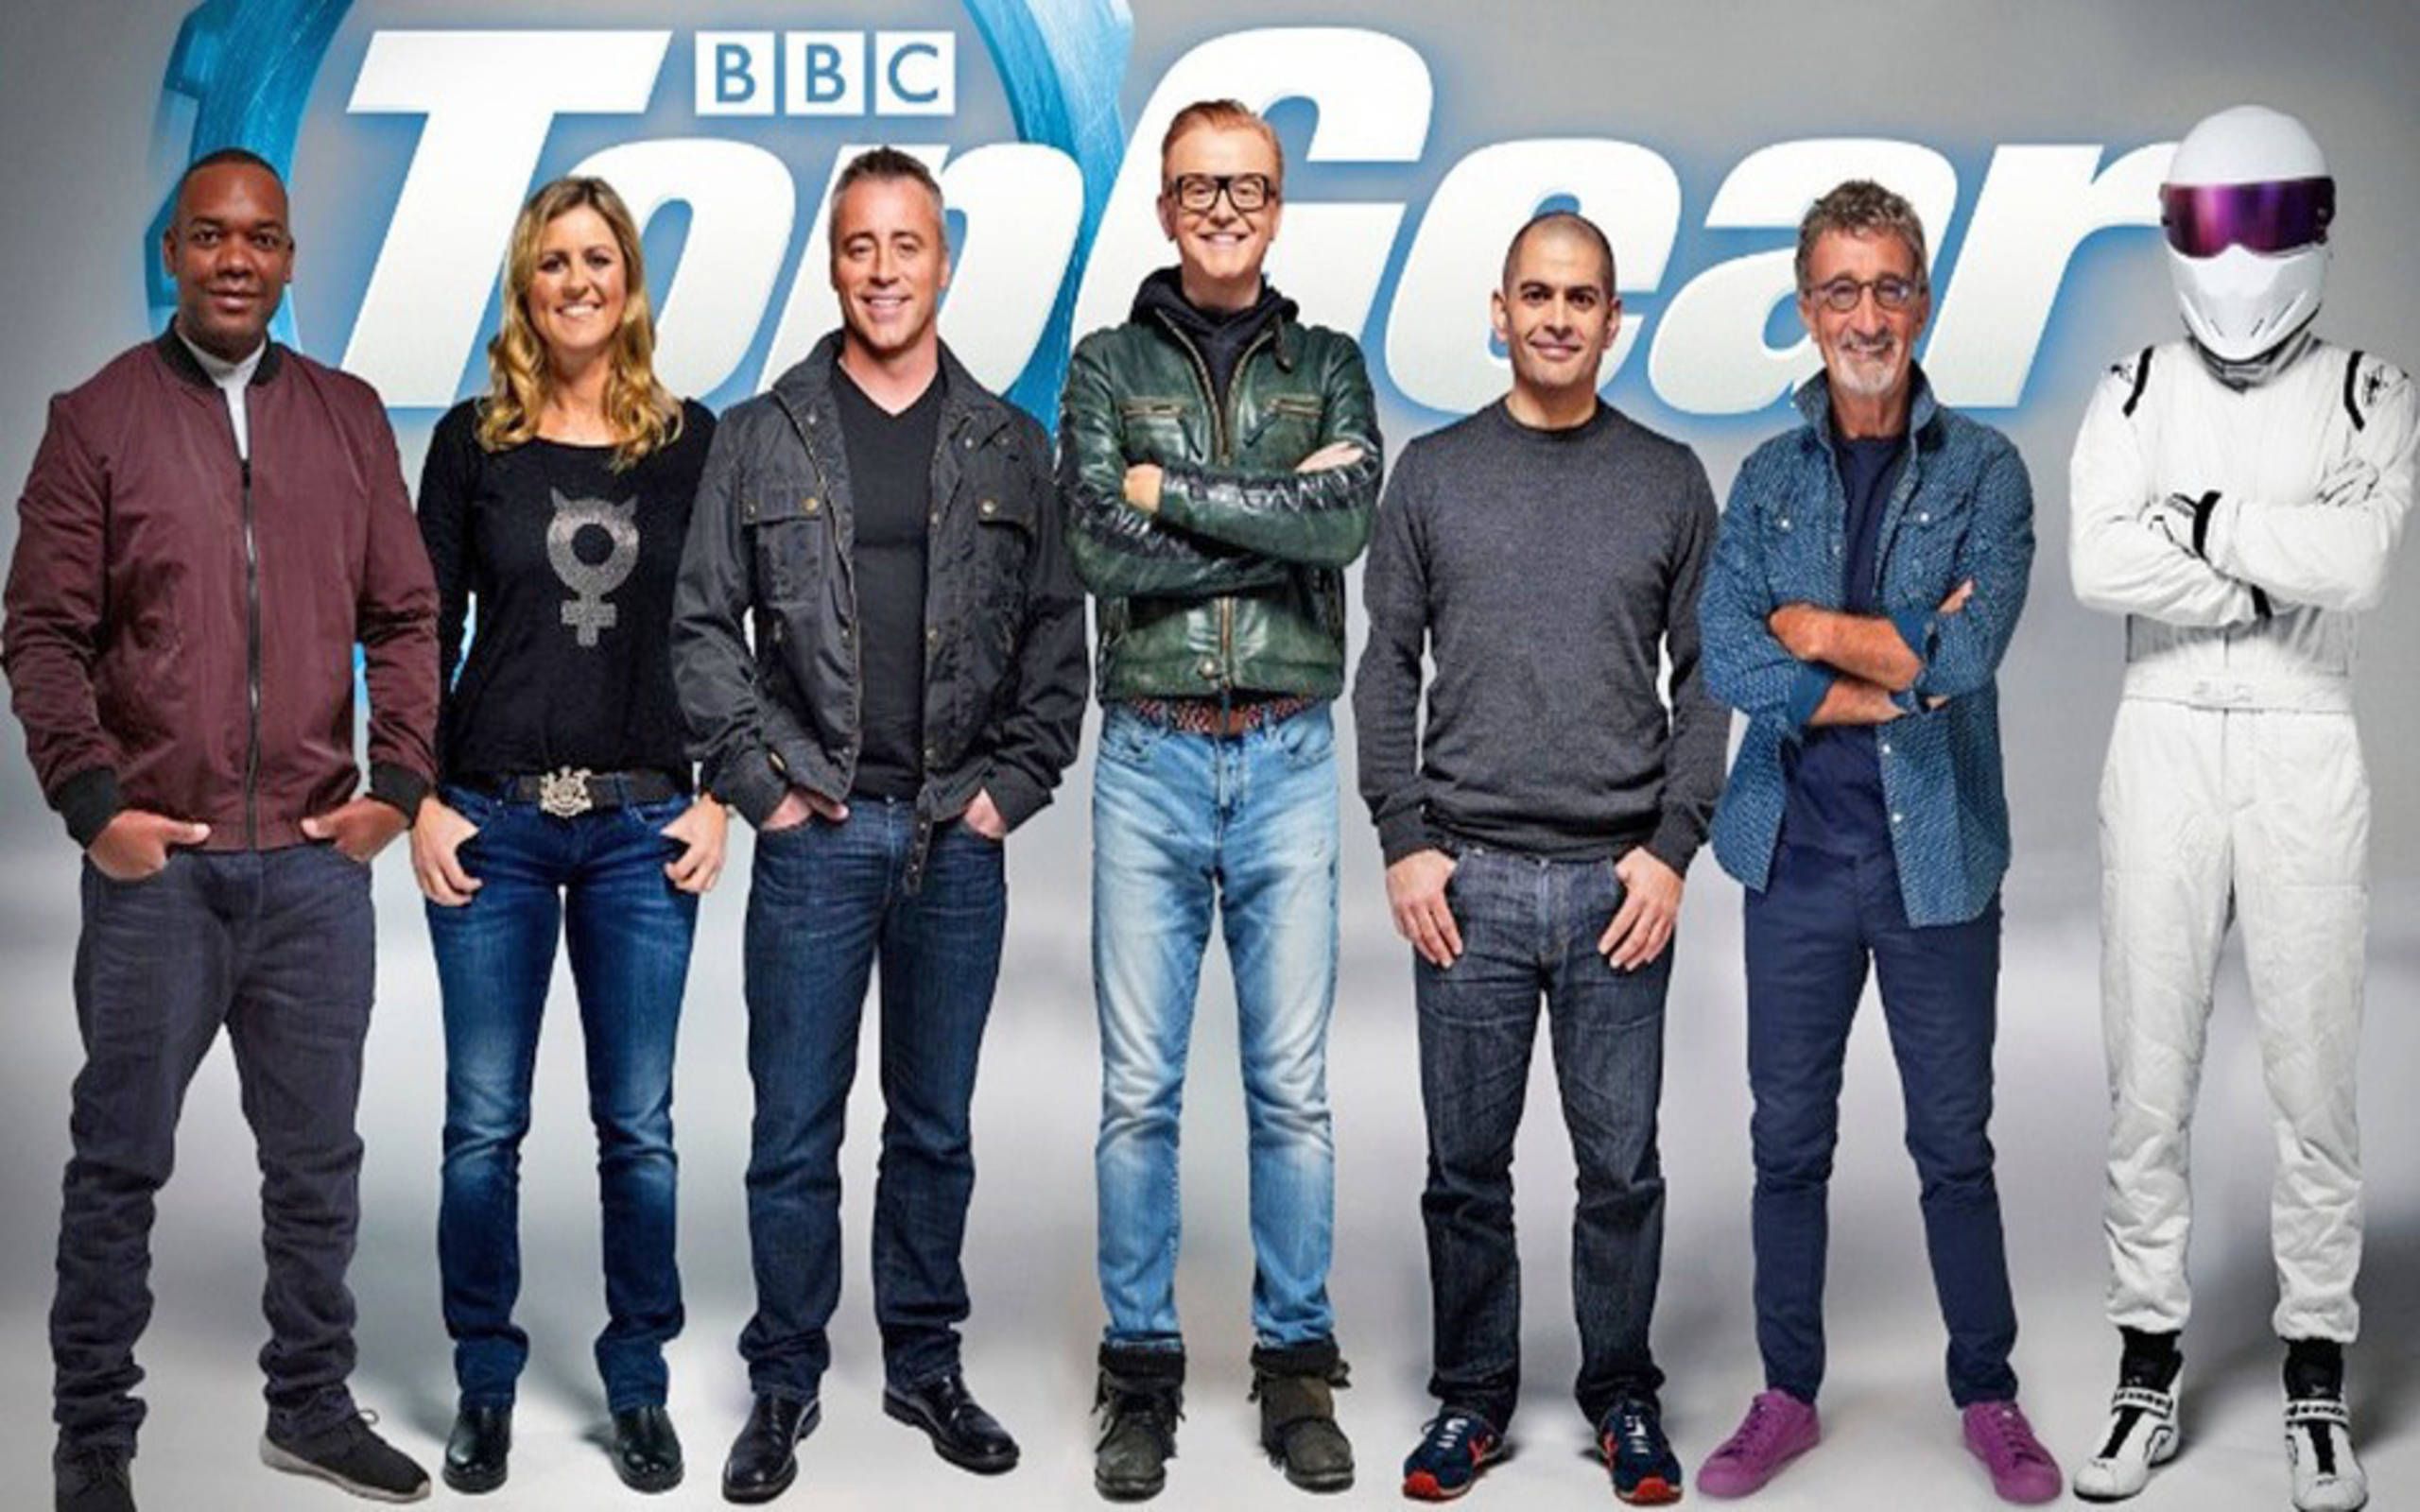 the entire 'Top Gear UK' cast